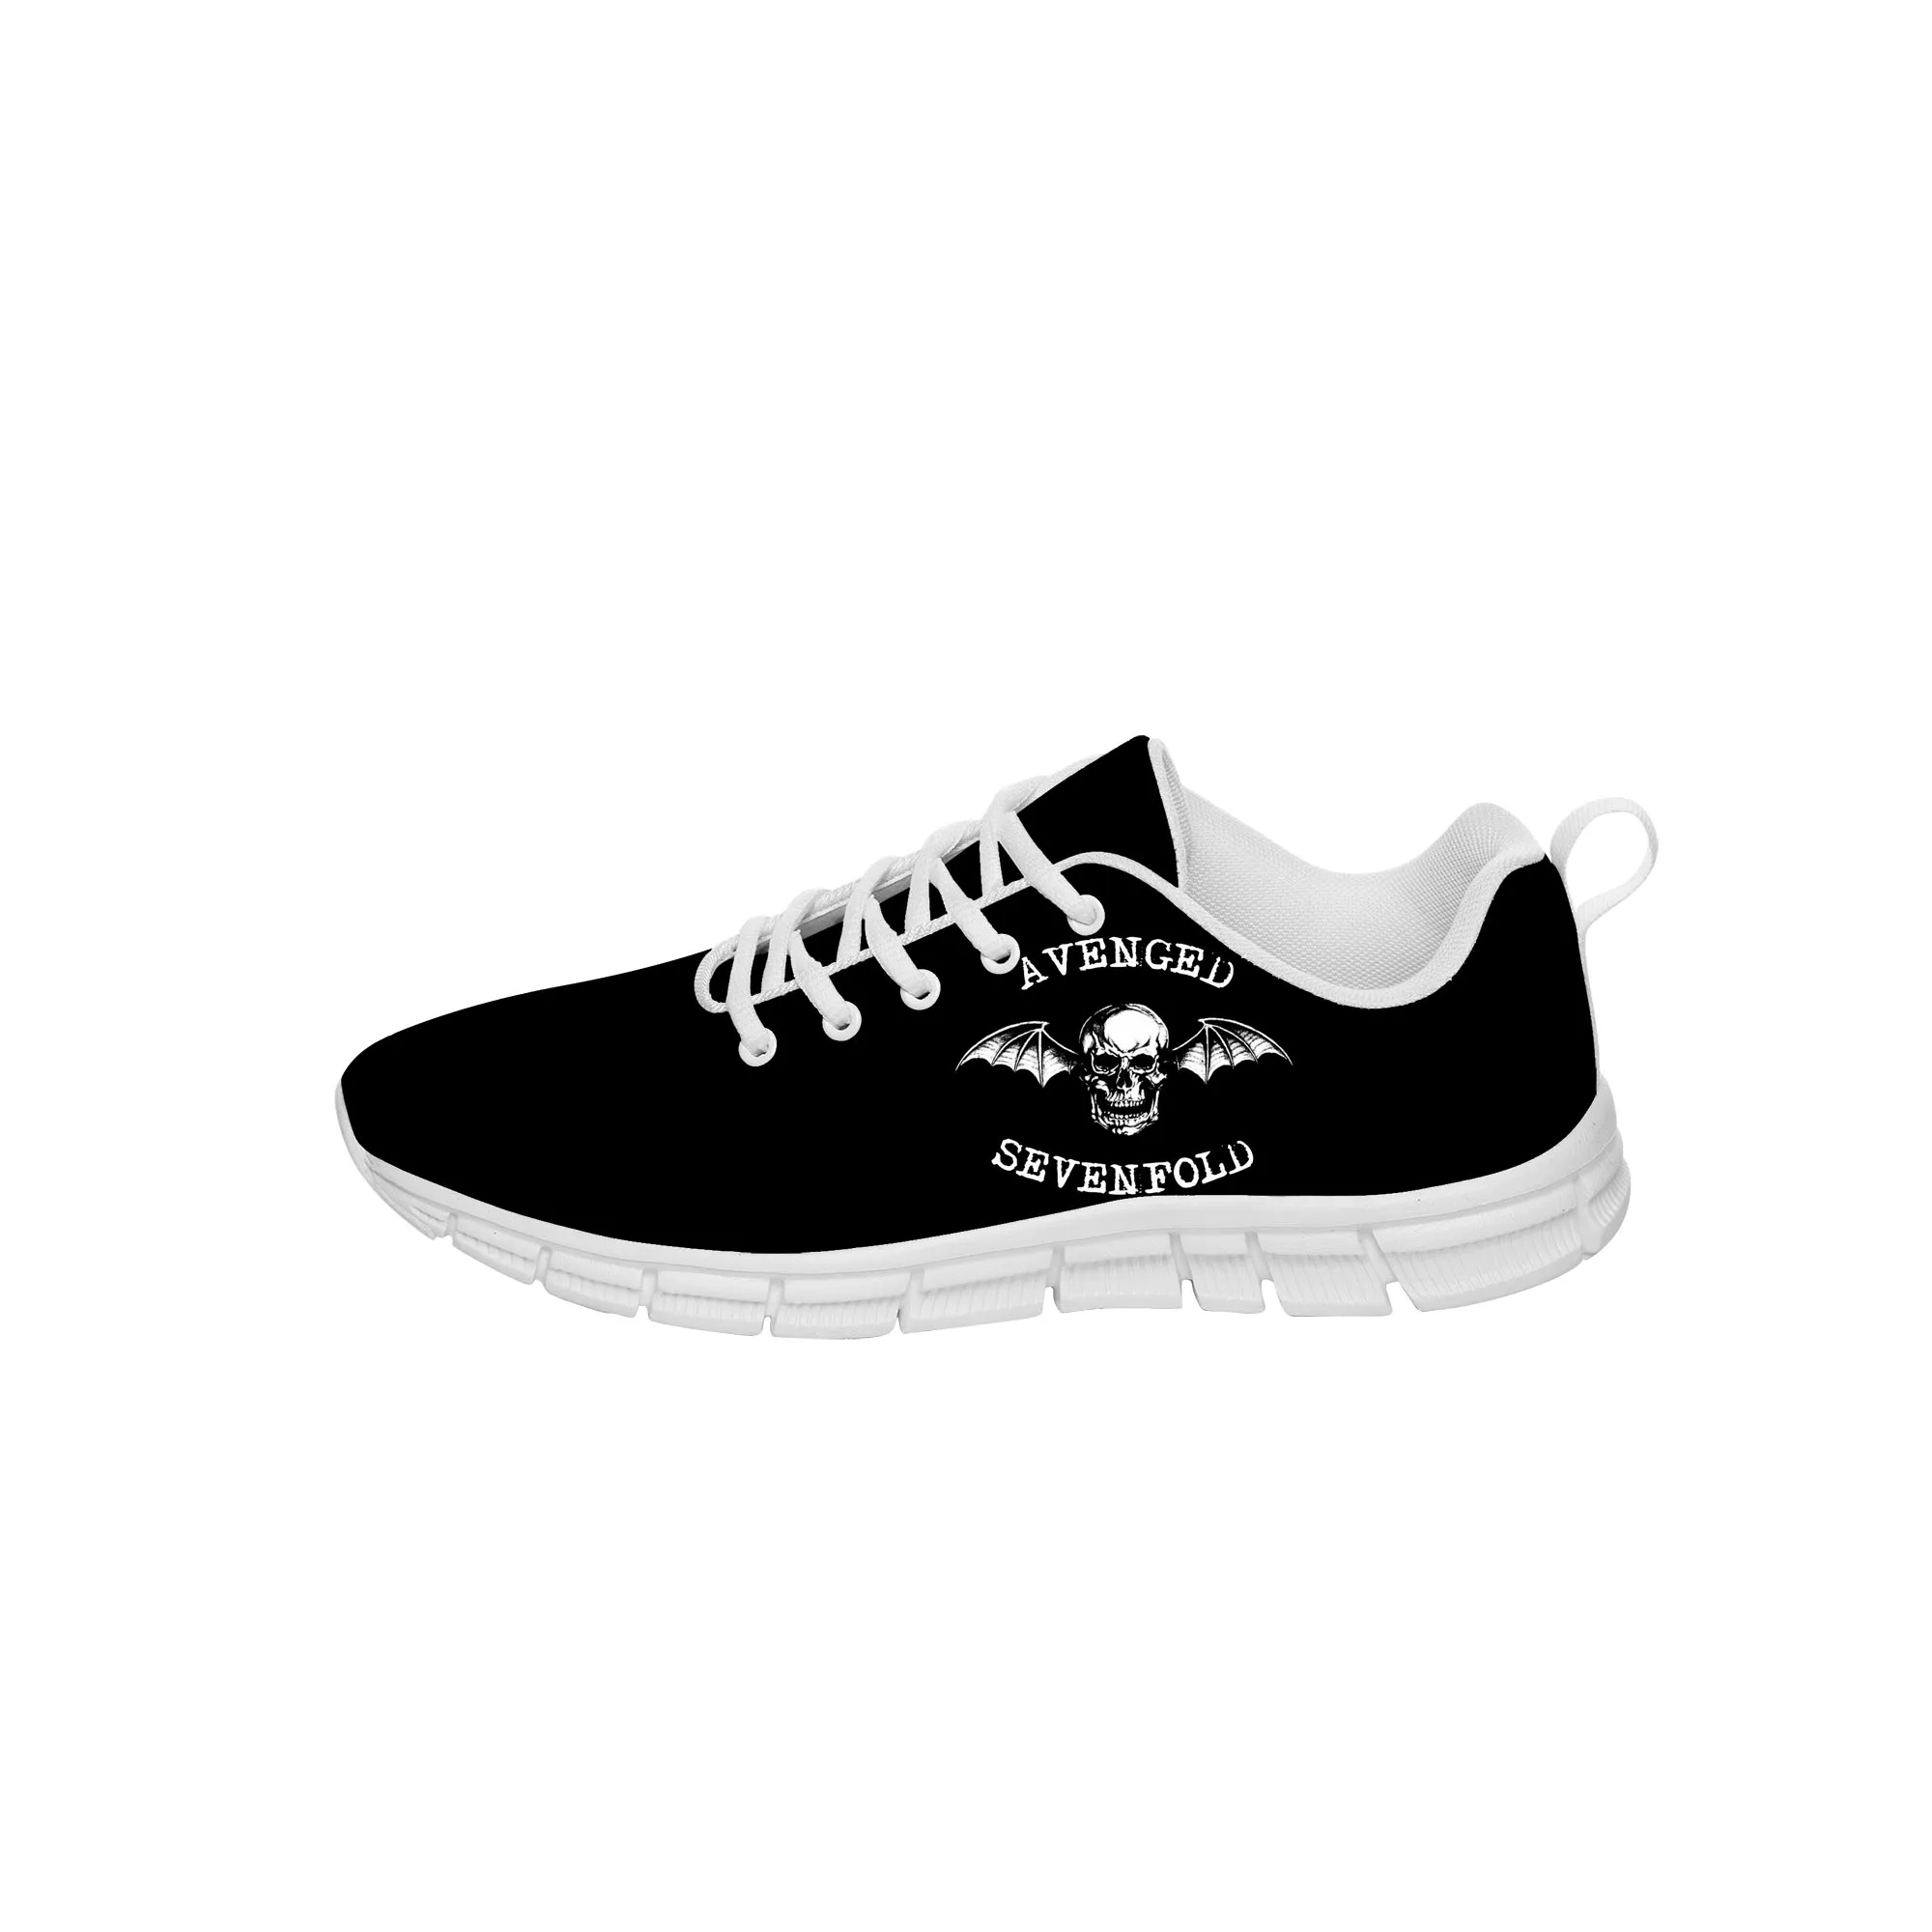 

Avenged Sevenfold A7X Sneakers Mens Womens Teenager Casual Cloth Shoes Canvas Running Shoes 3D Print Lightweight shoe White